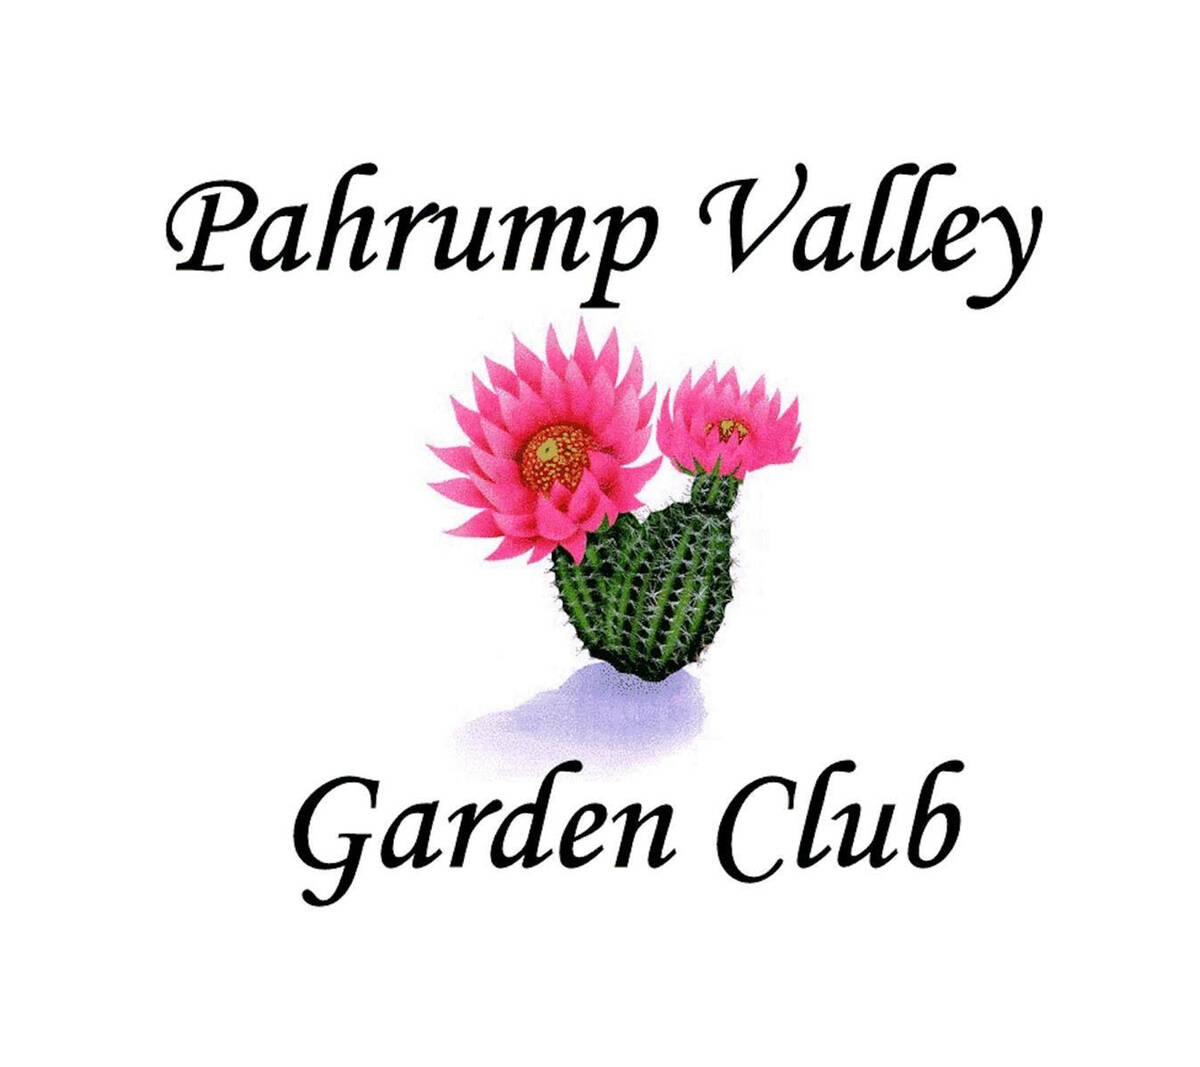 Special to the Pahrump Valley Times The Pahrump Valley Garden Club meets the second Saturday of ...